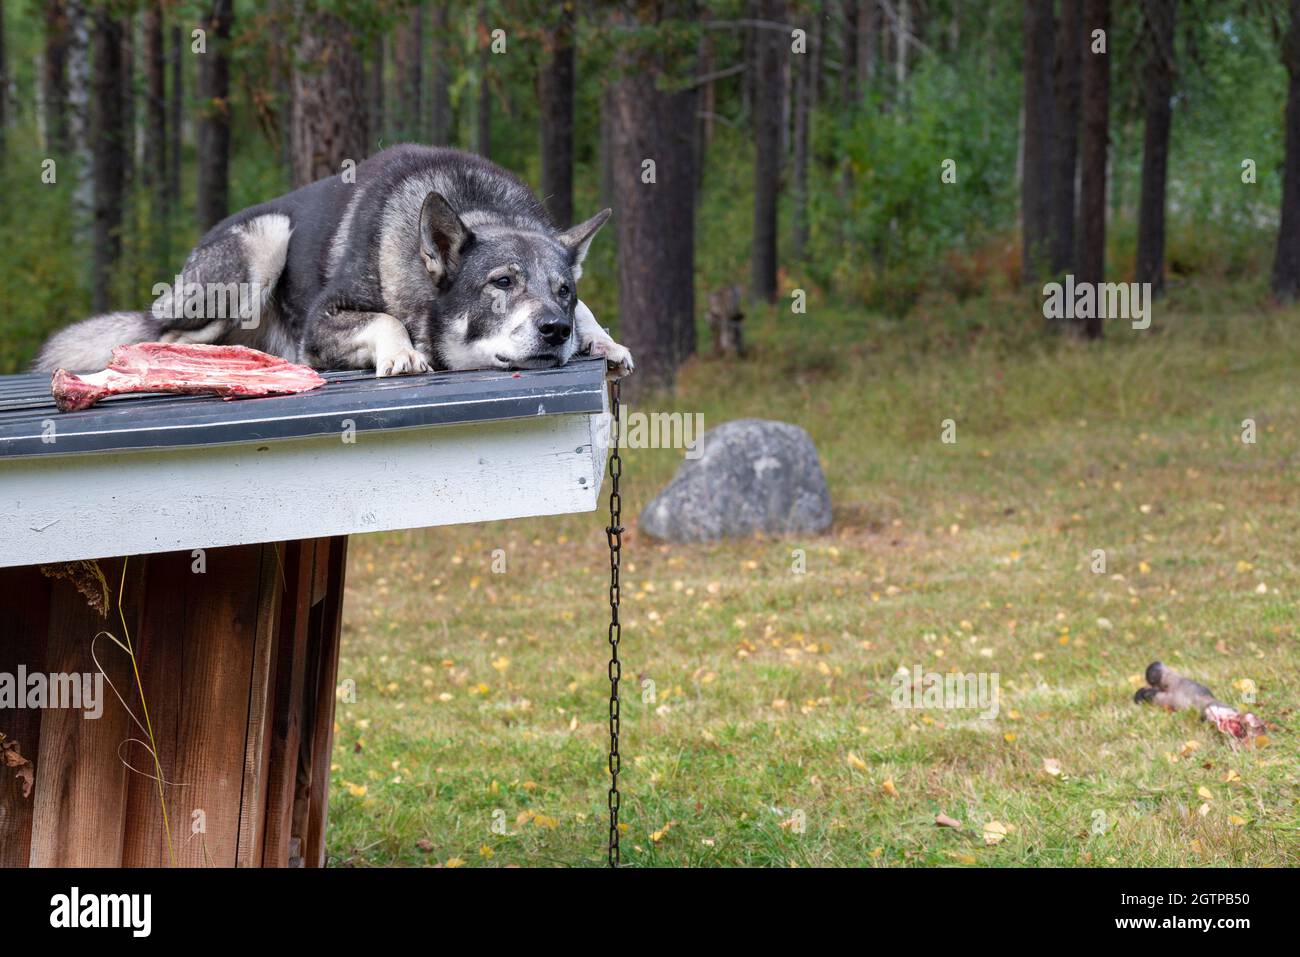 Typical breed of dog for hunting moose a Jamthund taking rest on the doghouse roof, picture from vasternorrland sweden. Stock Photo